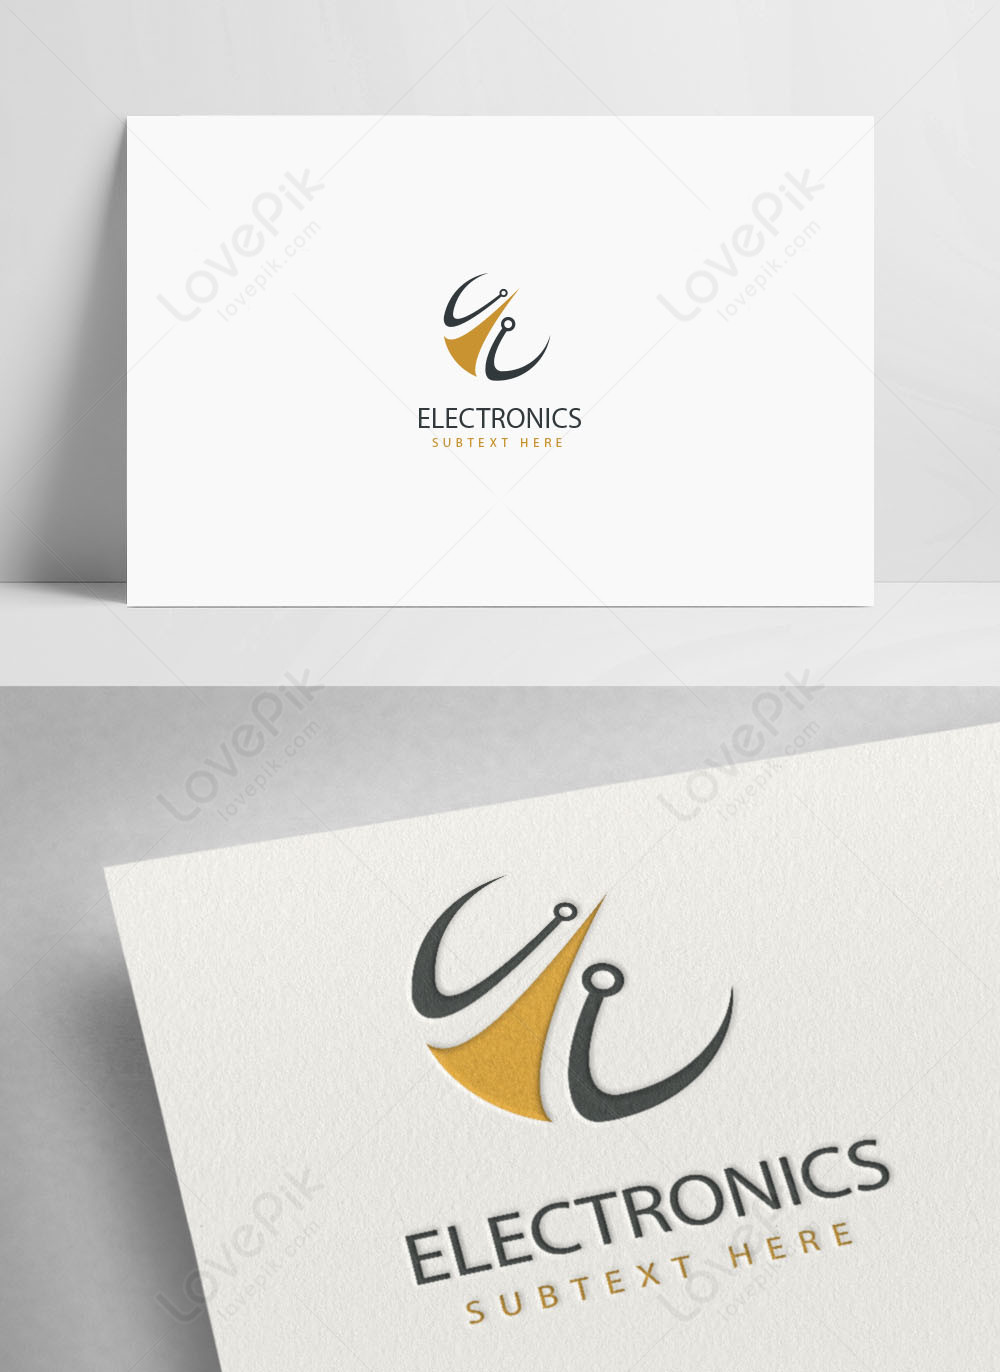 Rubix Media - Logo design for association of Electronics and Communication  Engineering. If any queries please contact us through chats🥰✌🏻  #oldlogo#association #associations #electronics #electronic #communication  #keralauniversity #università ...